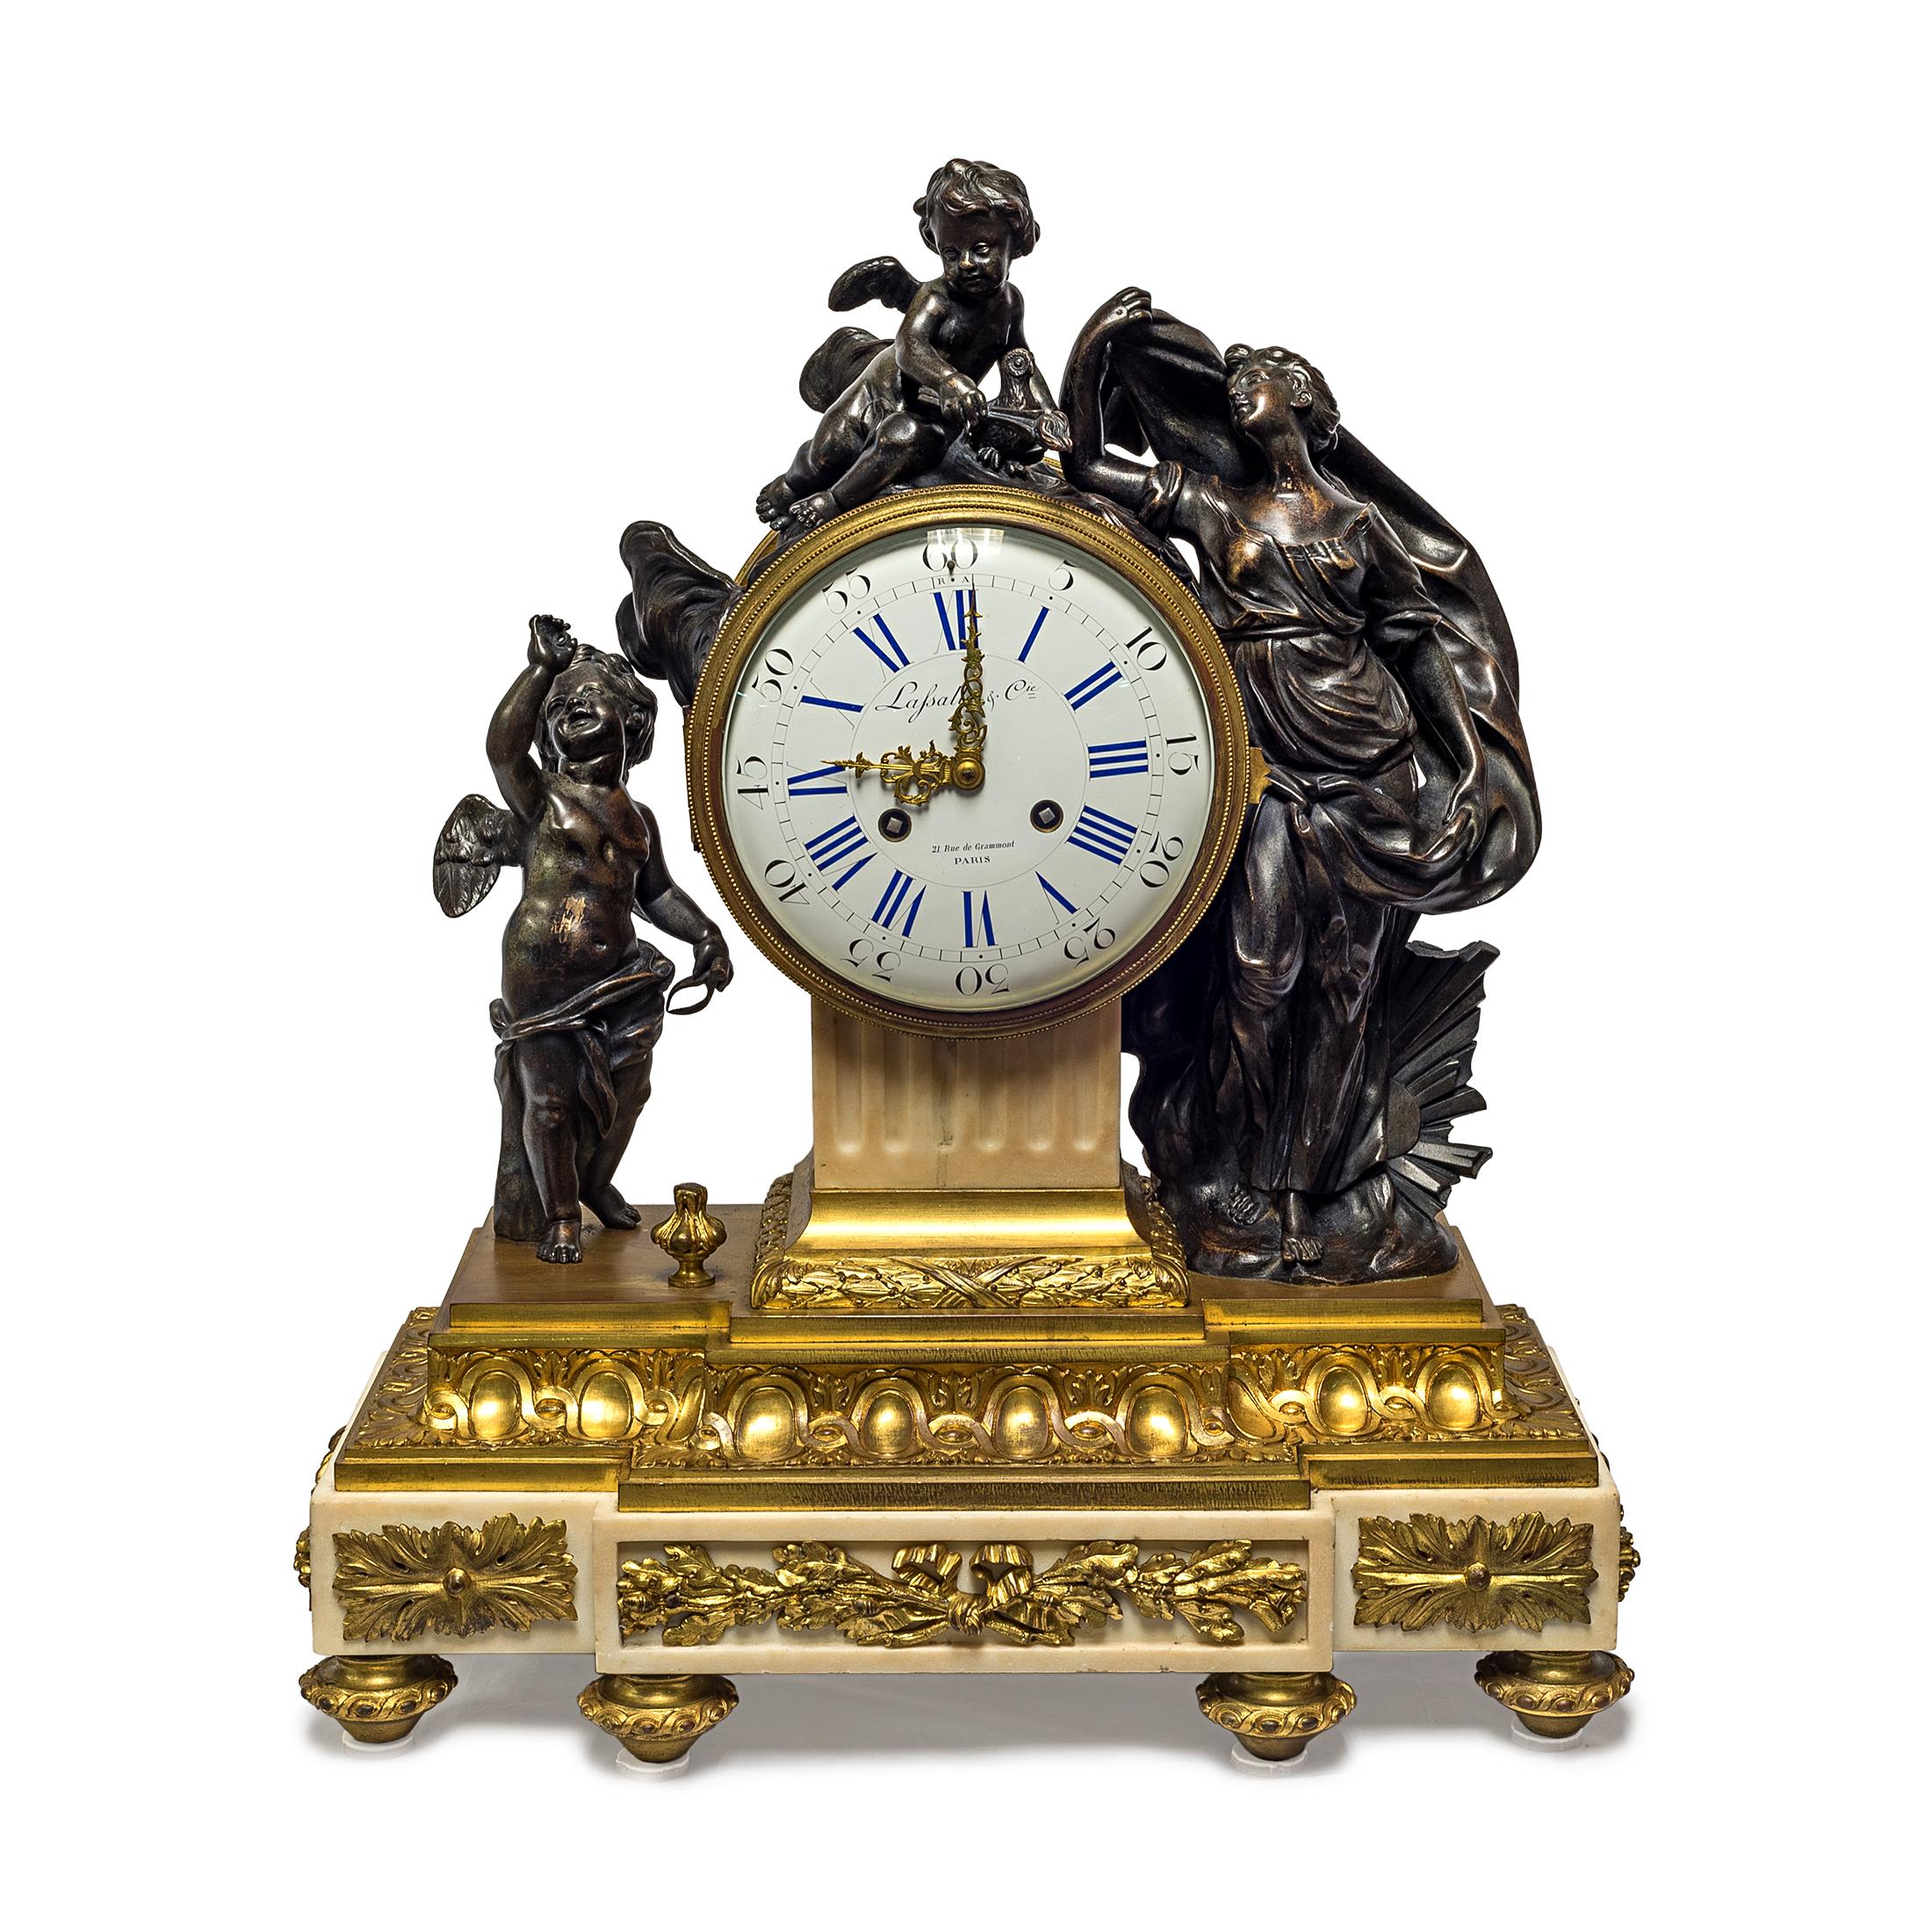 Fine quality Louis XVI gilt and patinated bronze figural mantel clock of Venus with cherubs.
Fine quality Louis XVI gilt and patinated bronze figural mantel clock of Venus with cherubs on marble base. Movement by Lafsalle & Cie. 21, Rue de